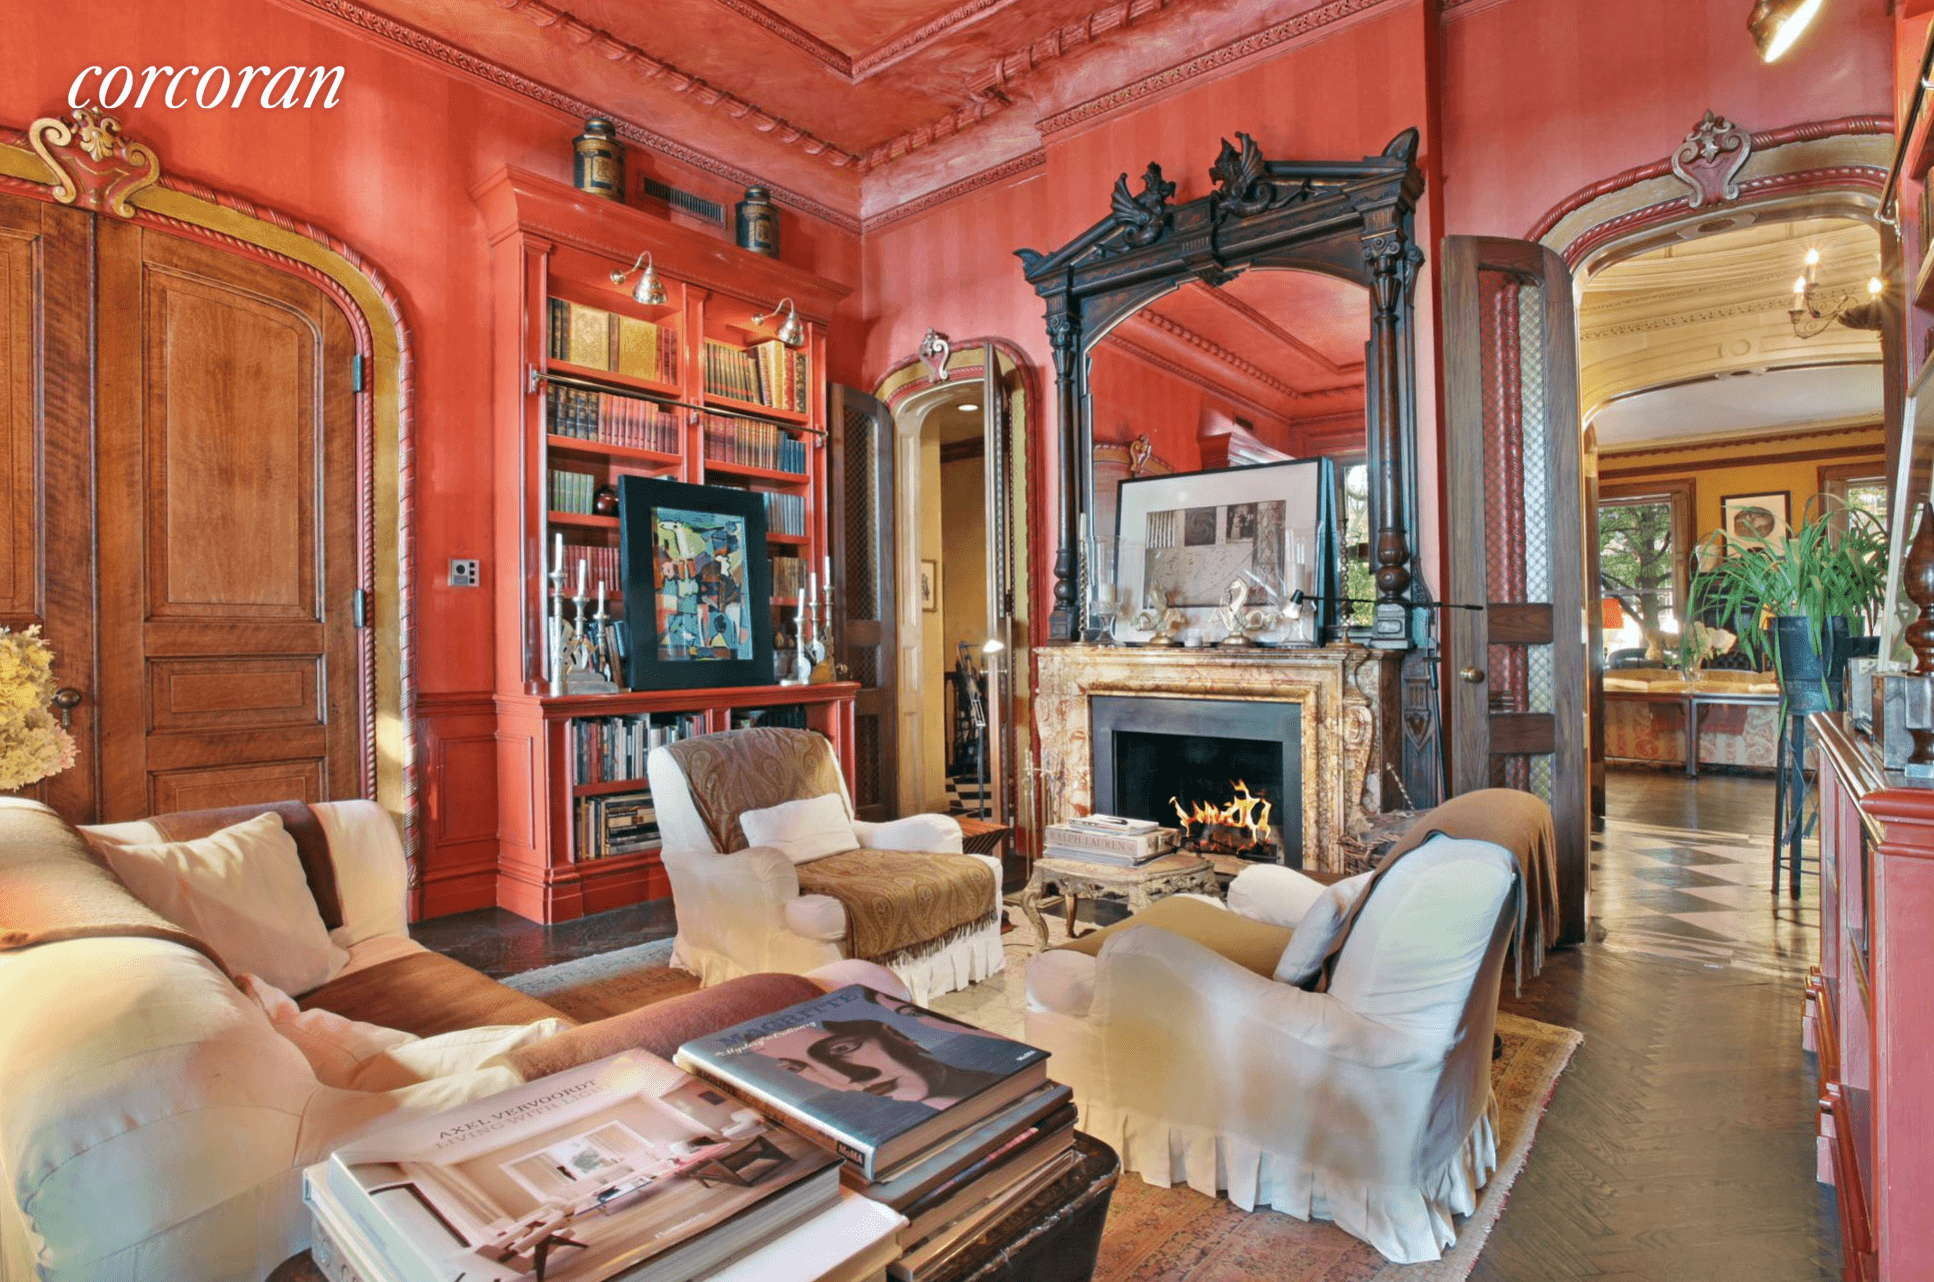 Simply the most elegant home in New York.